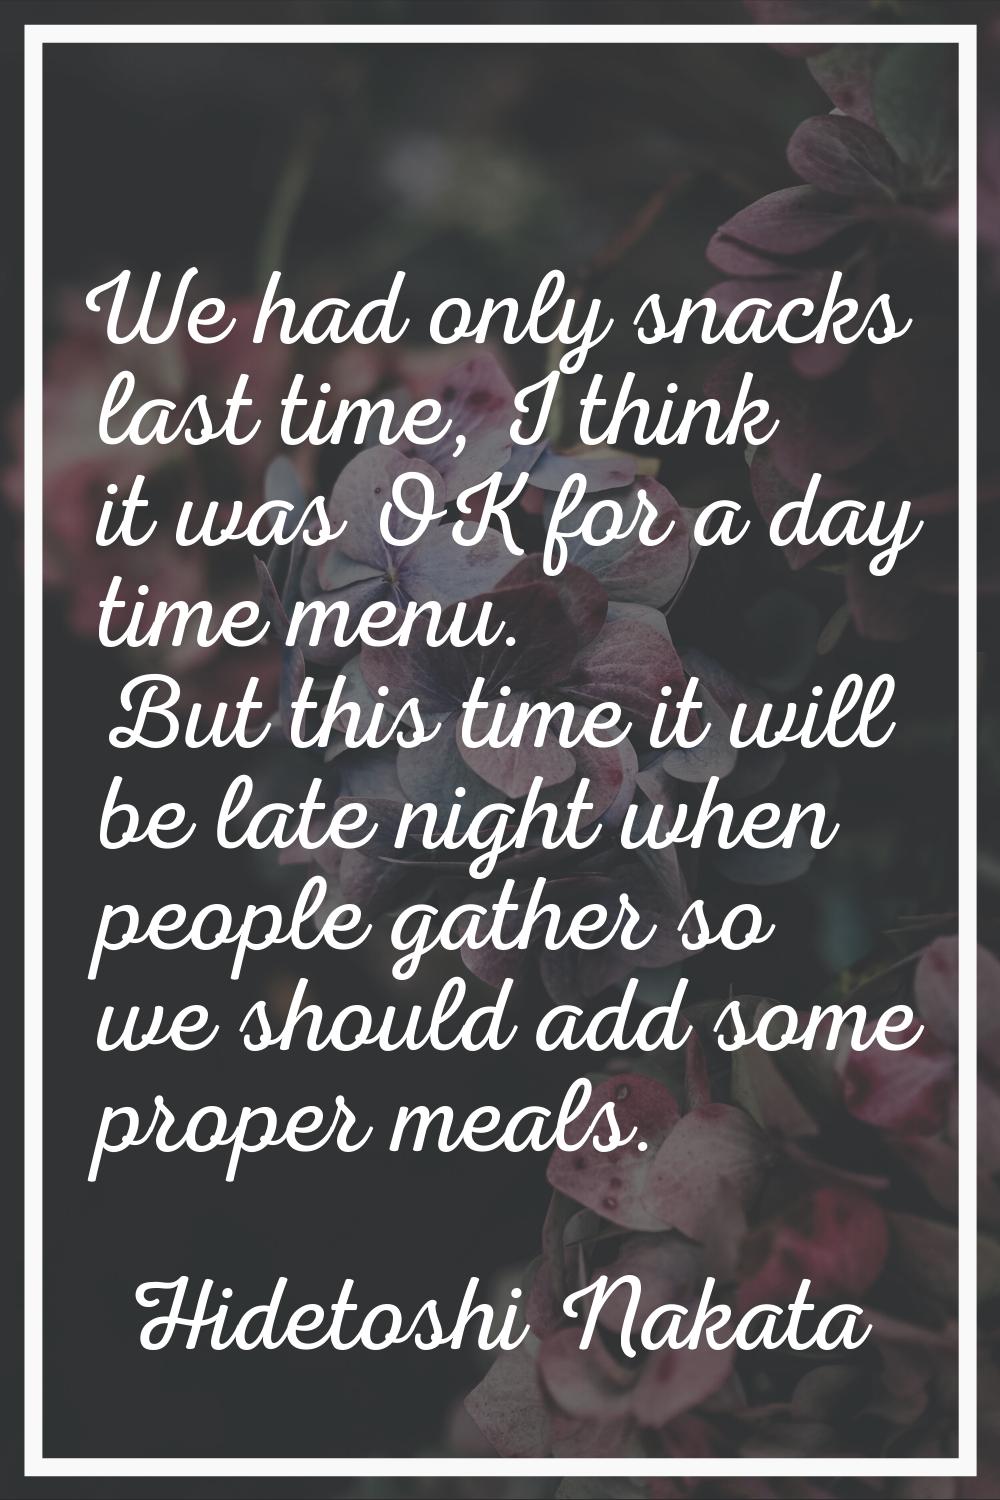 We had only snacks last time, I think it was OK for a day time menu. But this time it will be late 